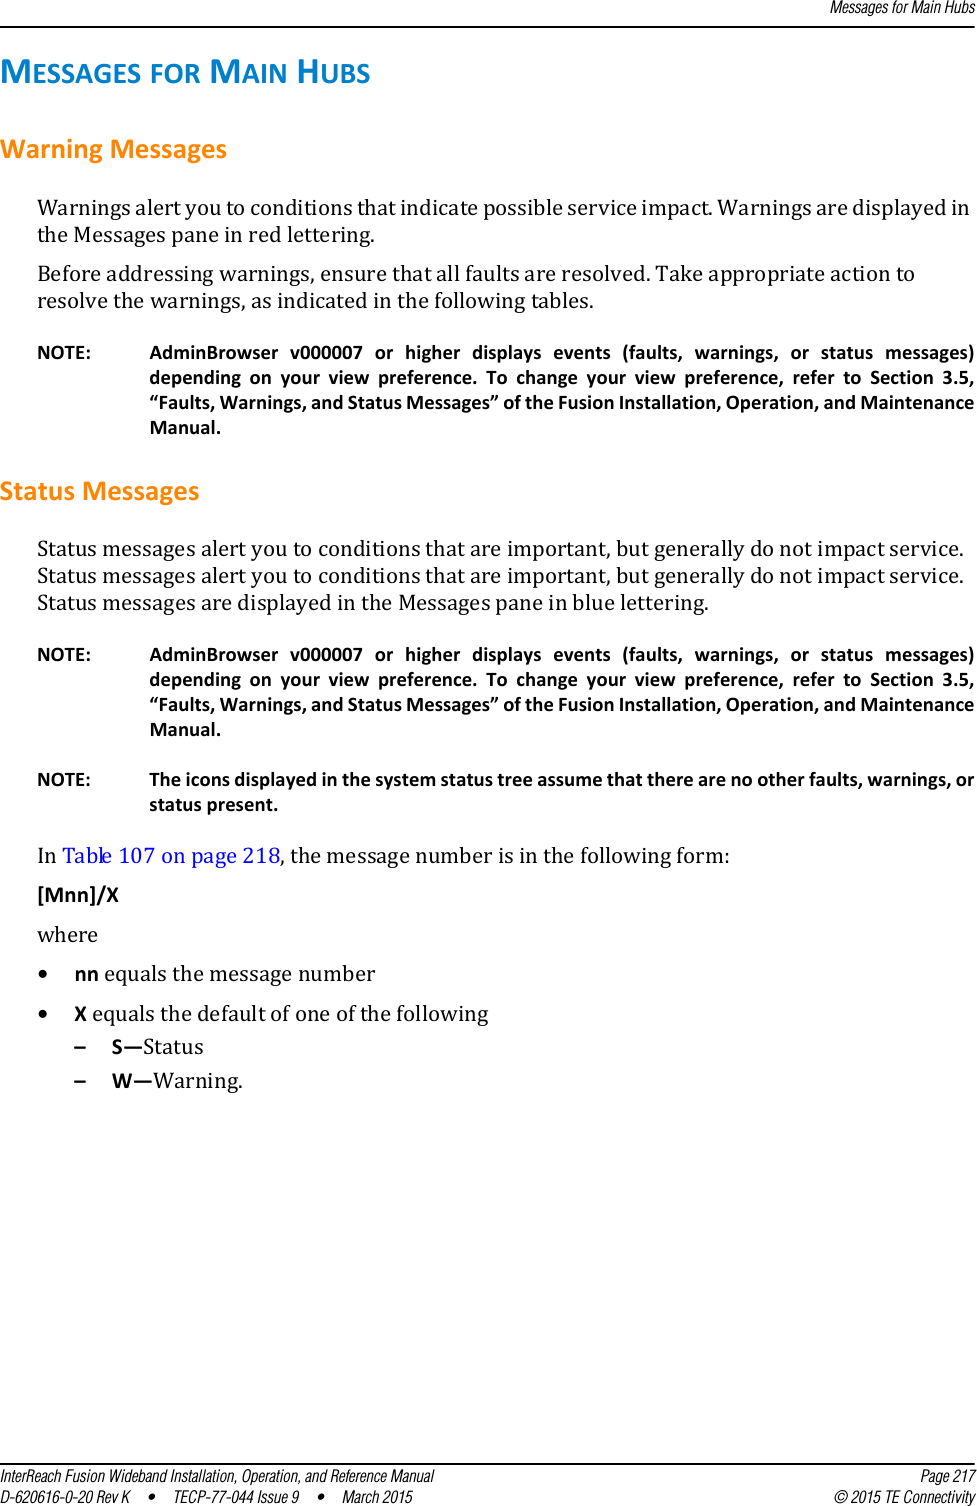 Messages for Main HubsInterReach Fusion Wideband Installation, Operation, and Reference Manual Page 217D-620616-0-20 Rev K  •  TECP-77-044 Issue 9  •  March 2015 © 2015 TE ConnectivityMESSAGES FOR MAIN HUBSWarning MessagesWarnings alert you to conditions that indicate possible service impact. Warnings are displayed in the Messages pane in red lettering.Before addressing warnings, ensure that all faults are resolved. Take appropriate action to resolve the warnings, as indicated in the following tables.NOTE: AdminBrowser v000007 or higher displays events (faults, warnings, or status messages) depending on your view preference. To change your view preference, refer to Section 3.5, “Faults, Warnings, and Status Messages” of the Fusion Installation, Operation, and Maintenance Manual.Status MessagesStatus messages alert you to conditions that are important, but generally do not impact service. Status messages alert you to conditions that are important, but generally do not impact service. Status messages are displayed in the Messages pane in blue lettering.NOTE: AdminBrowser v000007 or higher displays events (faults, warnings, or status messages) depending on your view preference. To change your view preference, refer to Section 3.5, “Faults, Warnings, and Status Messages” of the Fusion Installation, Operation, and Maintenance Manual.NOTE: The icons displayed in the system status tree assume that there are no other faults, warnings, or status present.In Table 107 on page 218, the message number is in the following form:[Mnn]/X where •nn equals the message number•X equals the default of one of the following–S—Status–W—Warning.